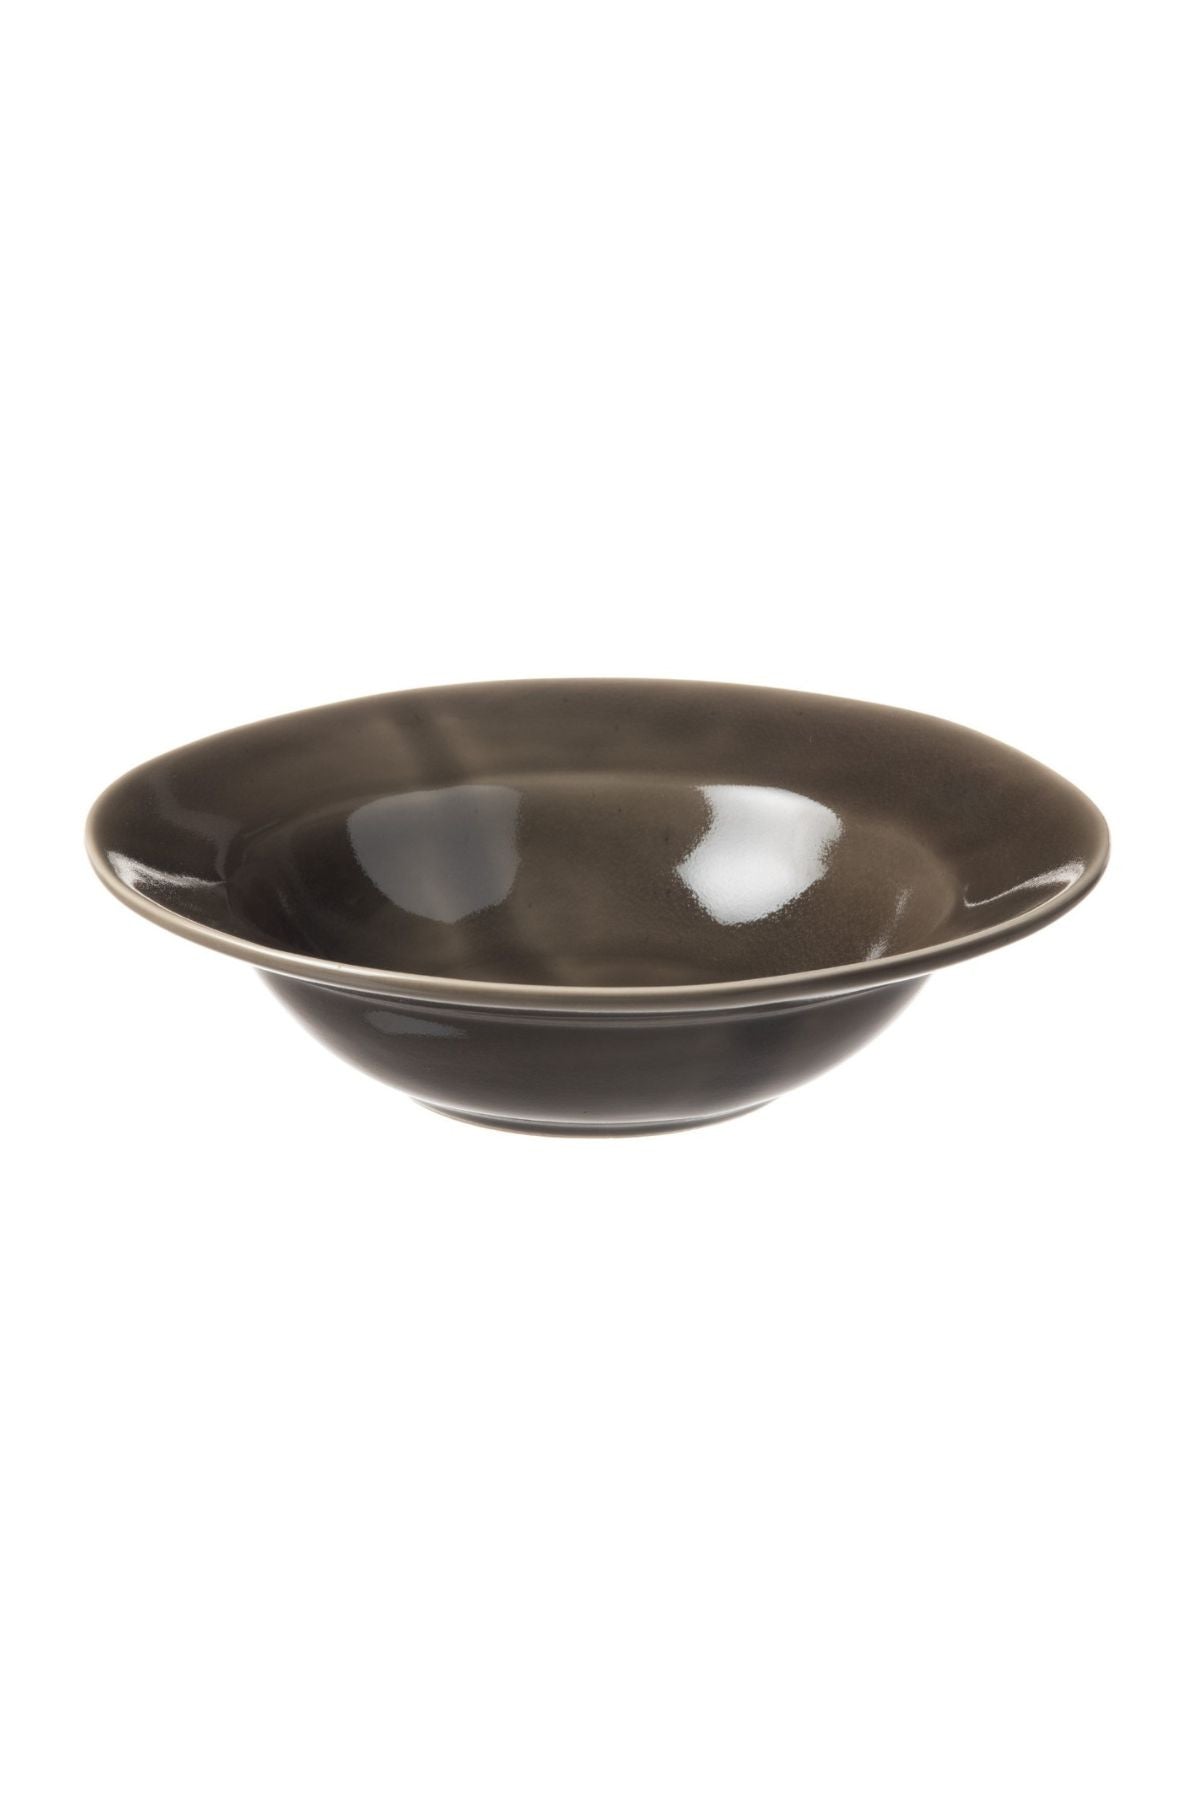 PASTAPLATE 25cm SMOOTH, OLIVE